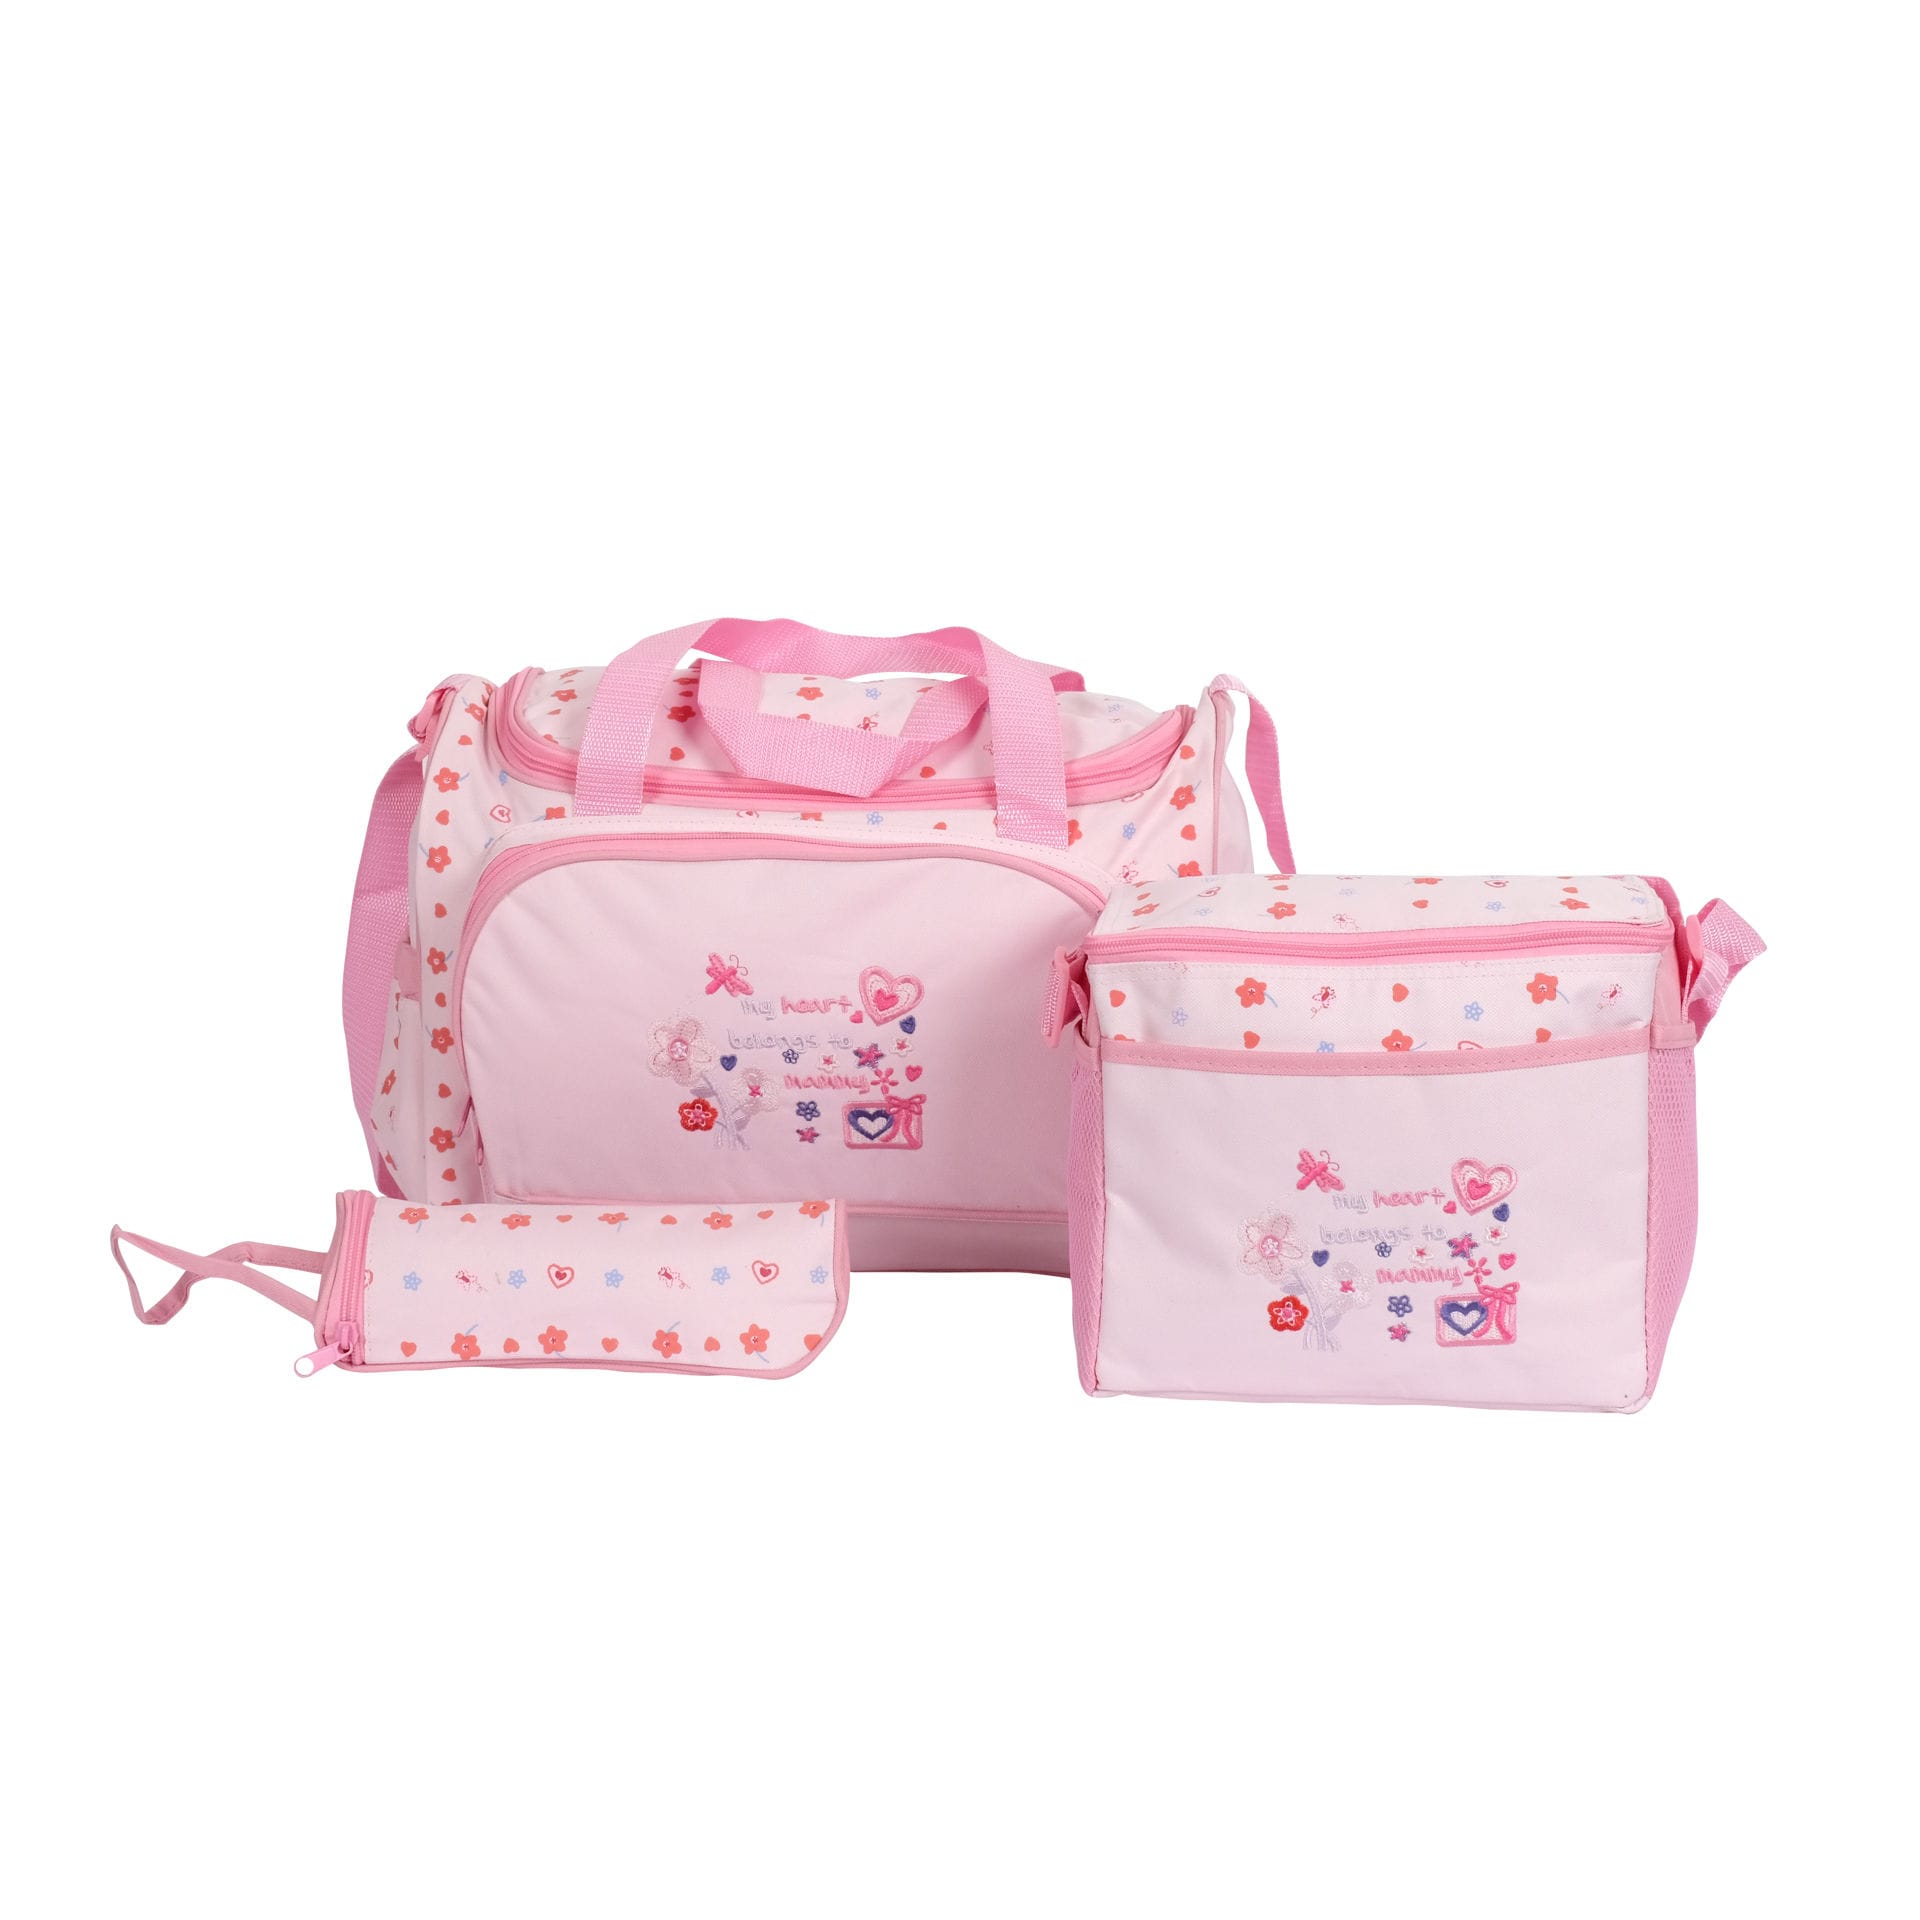 5PCS Diaper Bag Tote Set - Baby Bags for Mom : Amazon.in: Baby Products